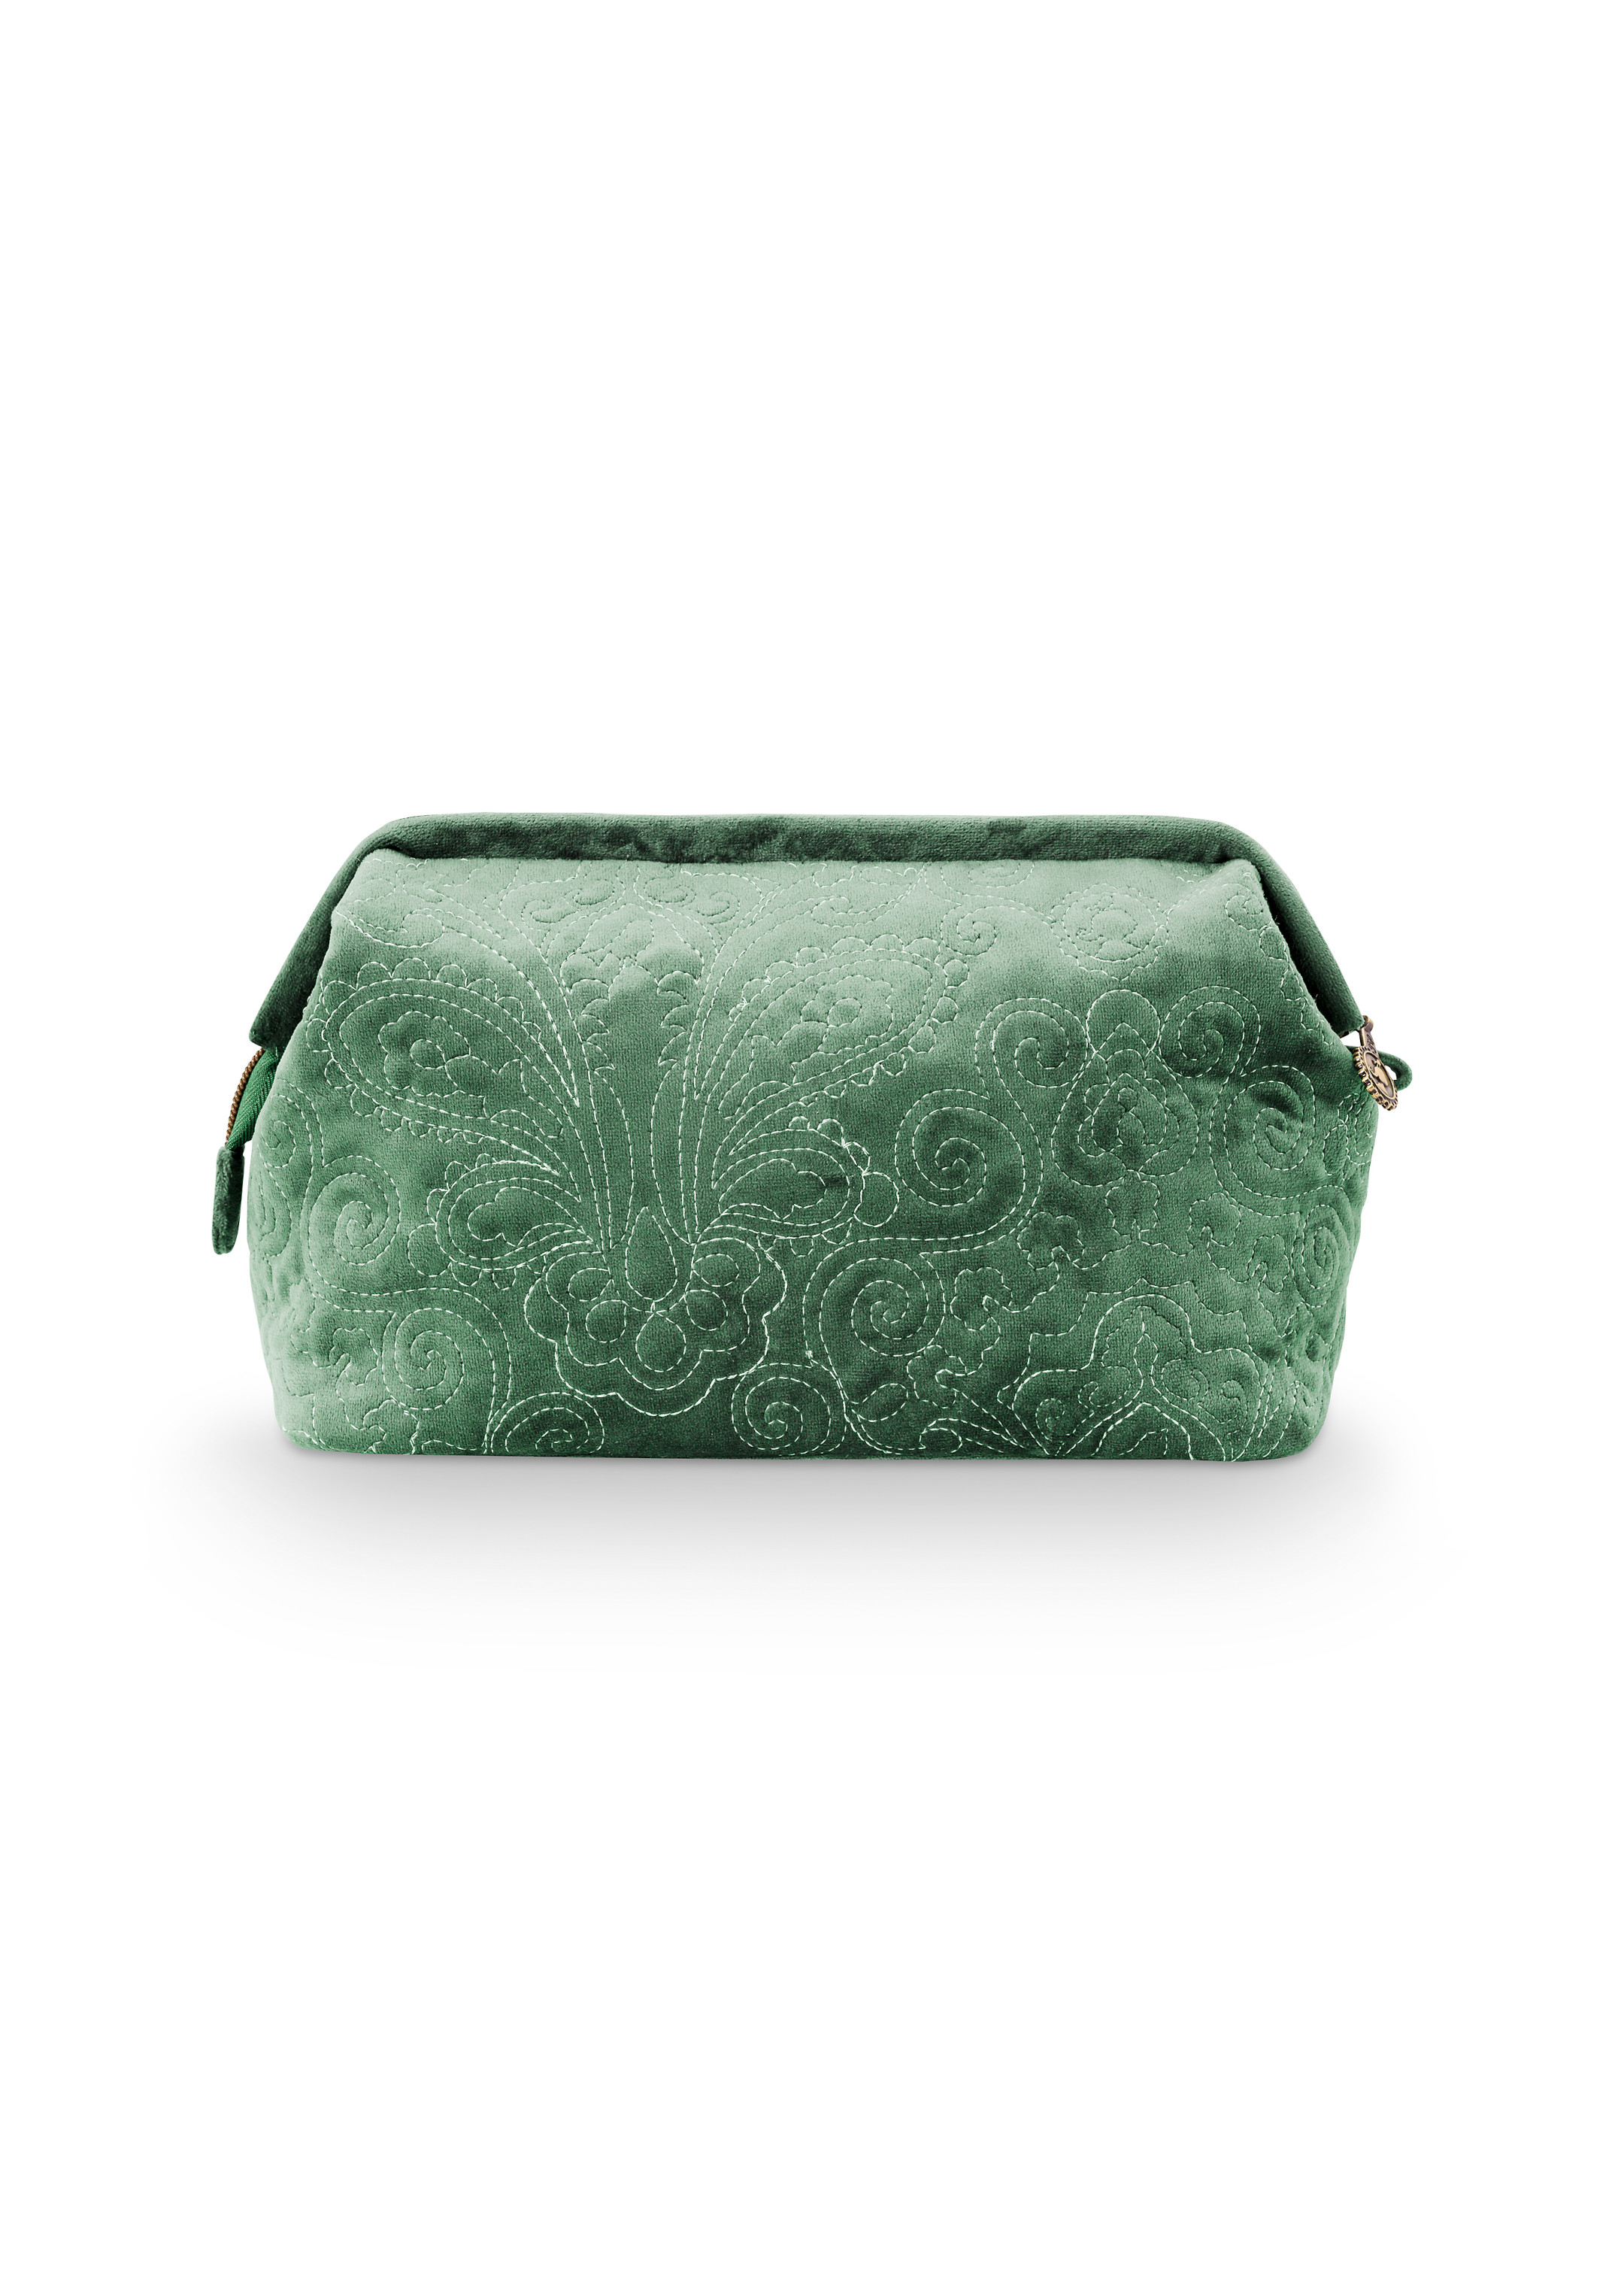 Cosmetic Purse Large Velvet Quilted Green 26x18x12cm Gift